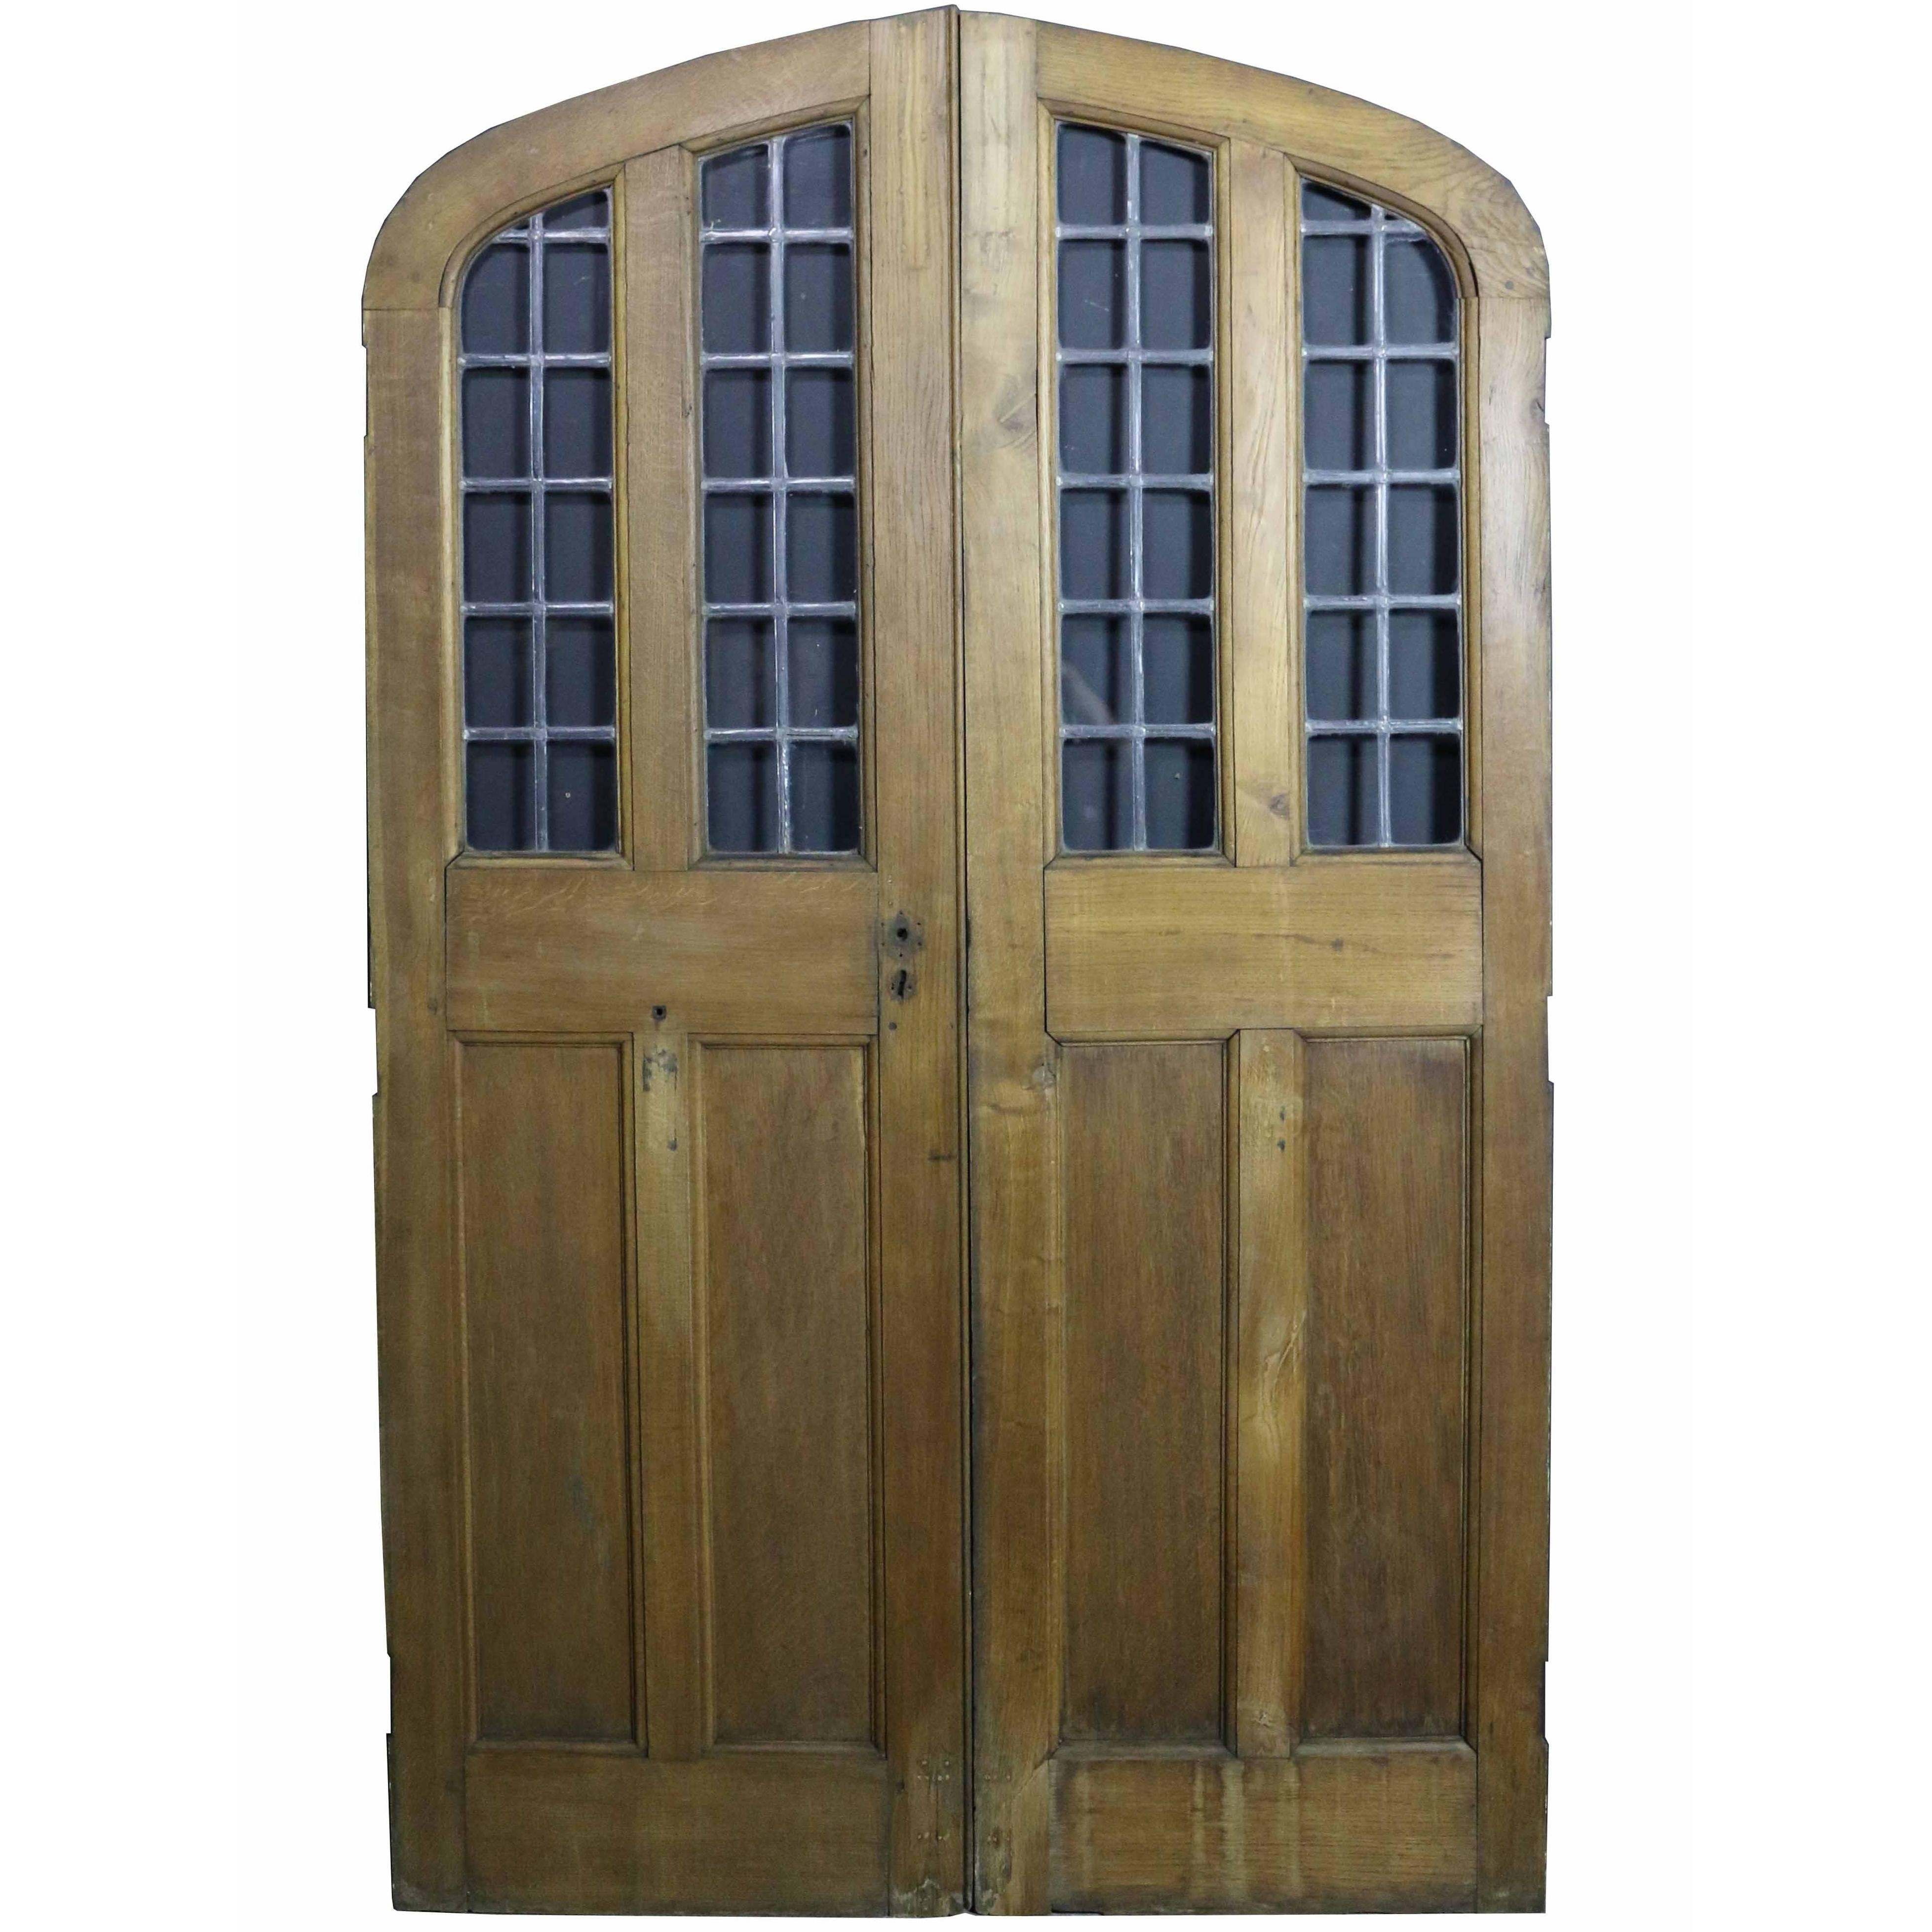 Pair of Arched Oak Double Doors with Leaded Glass Panel, circa 1900